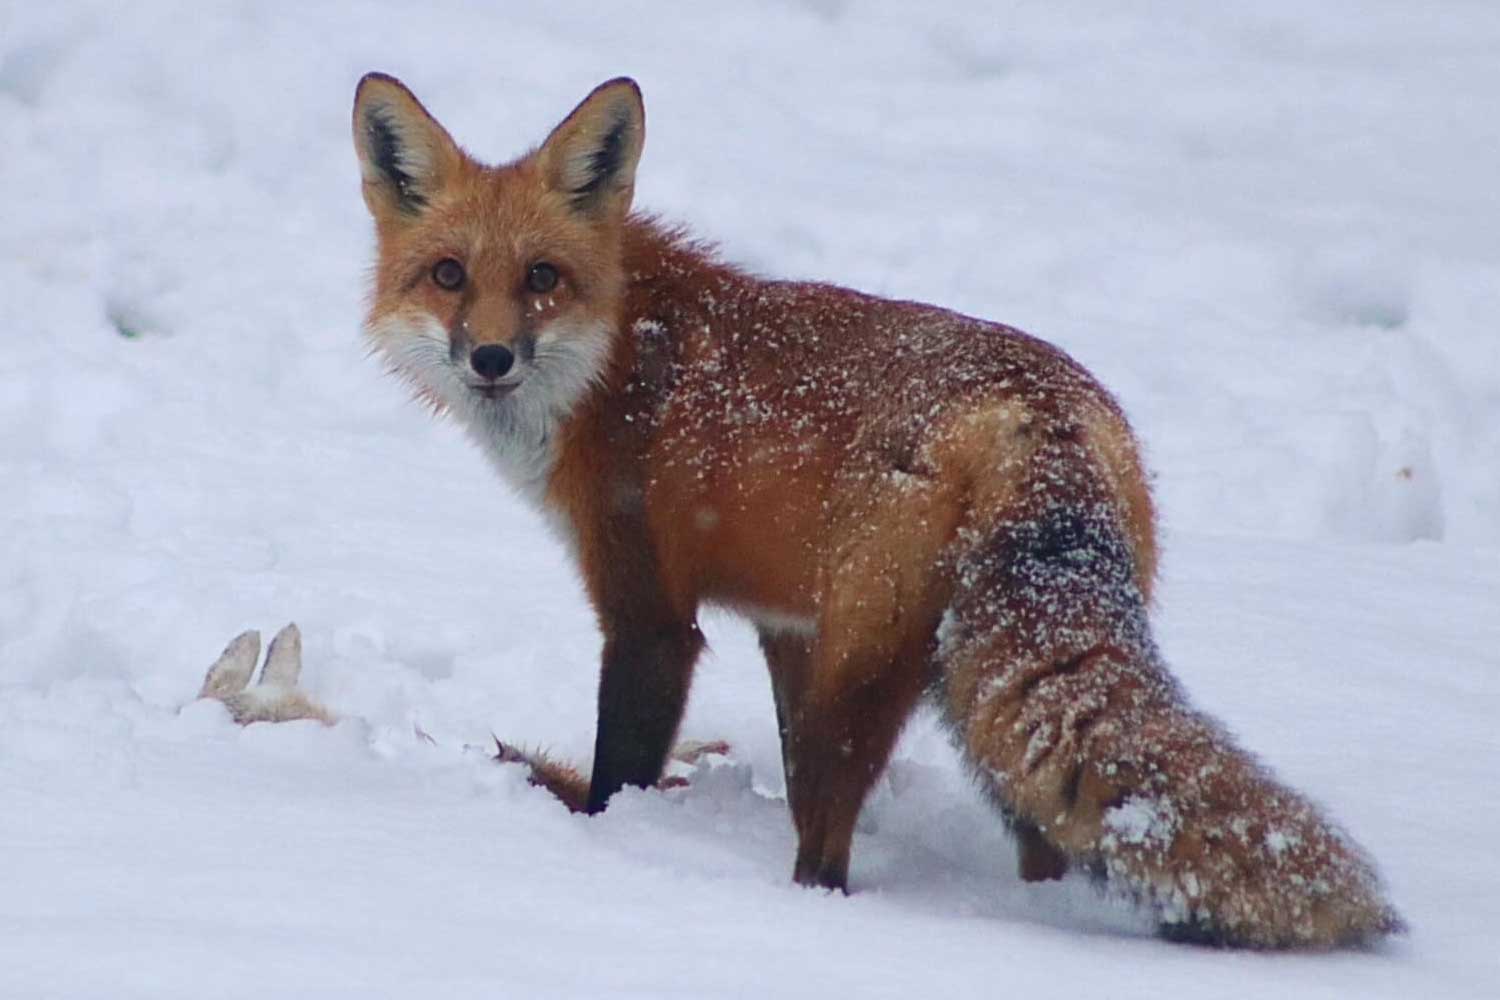 Red fox standing in snow.